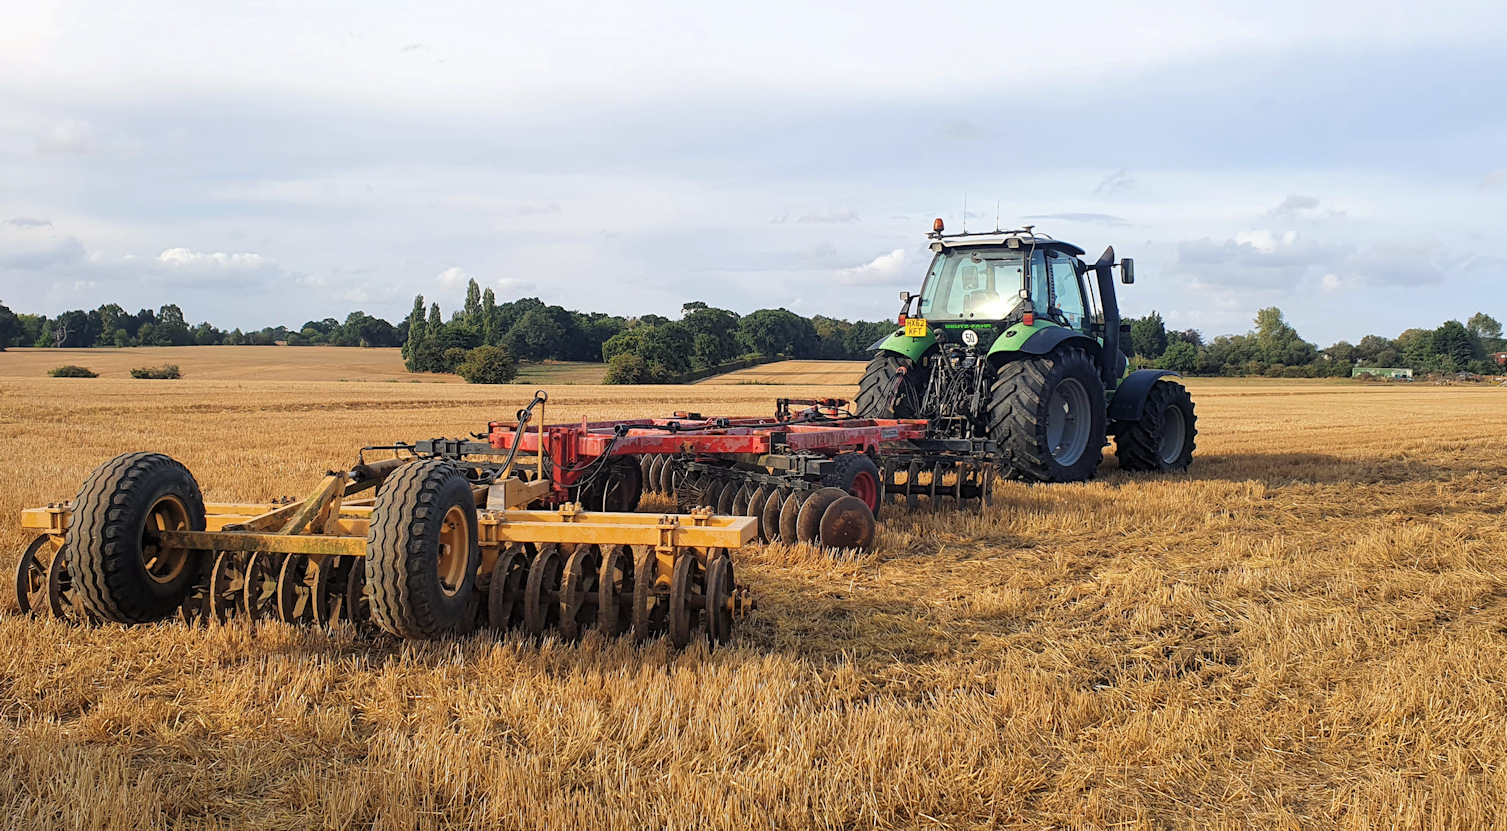 A tractor towing farm equipment on a recently harvested field